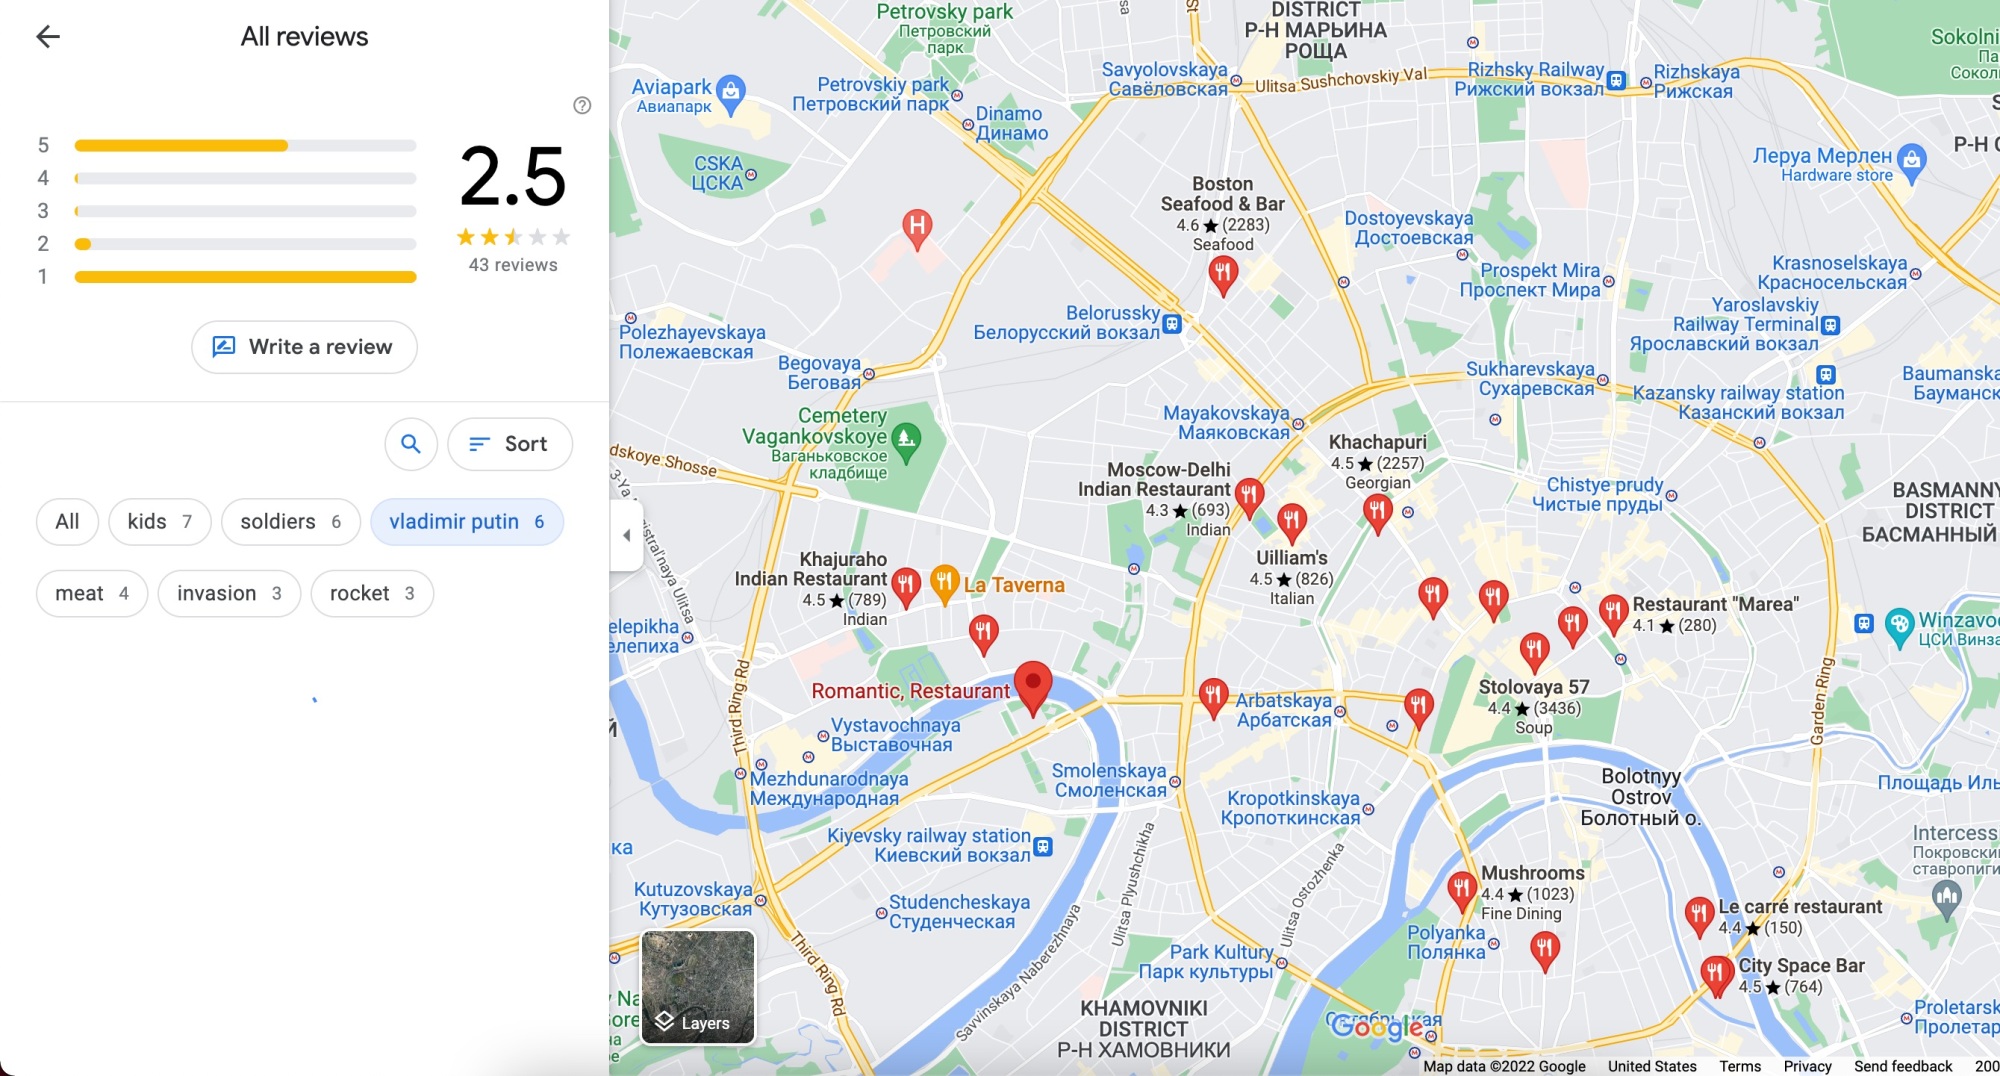 screenshot of google maps in Moscow without posts about the invasion